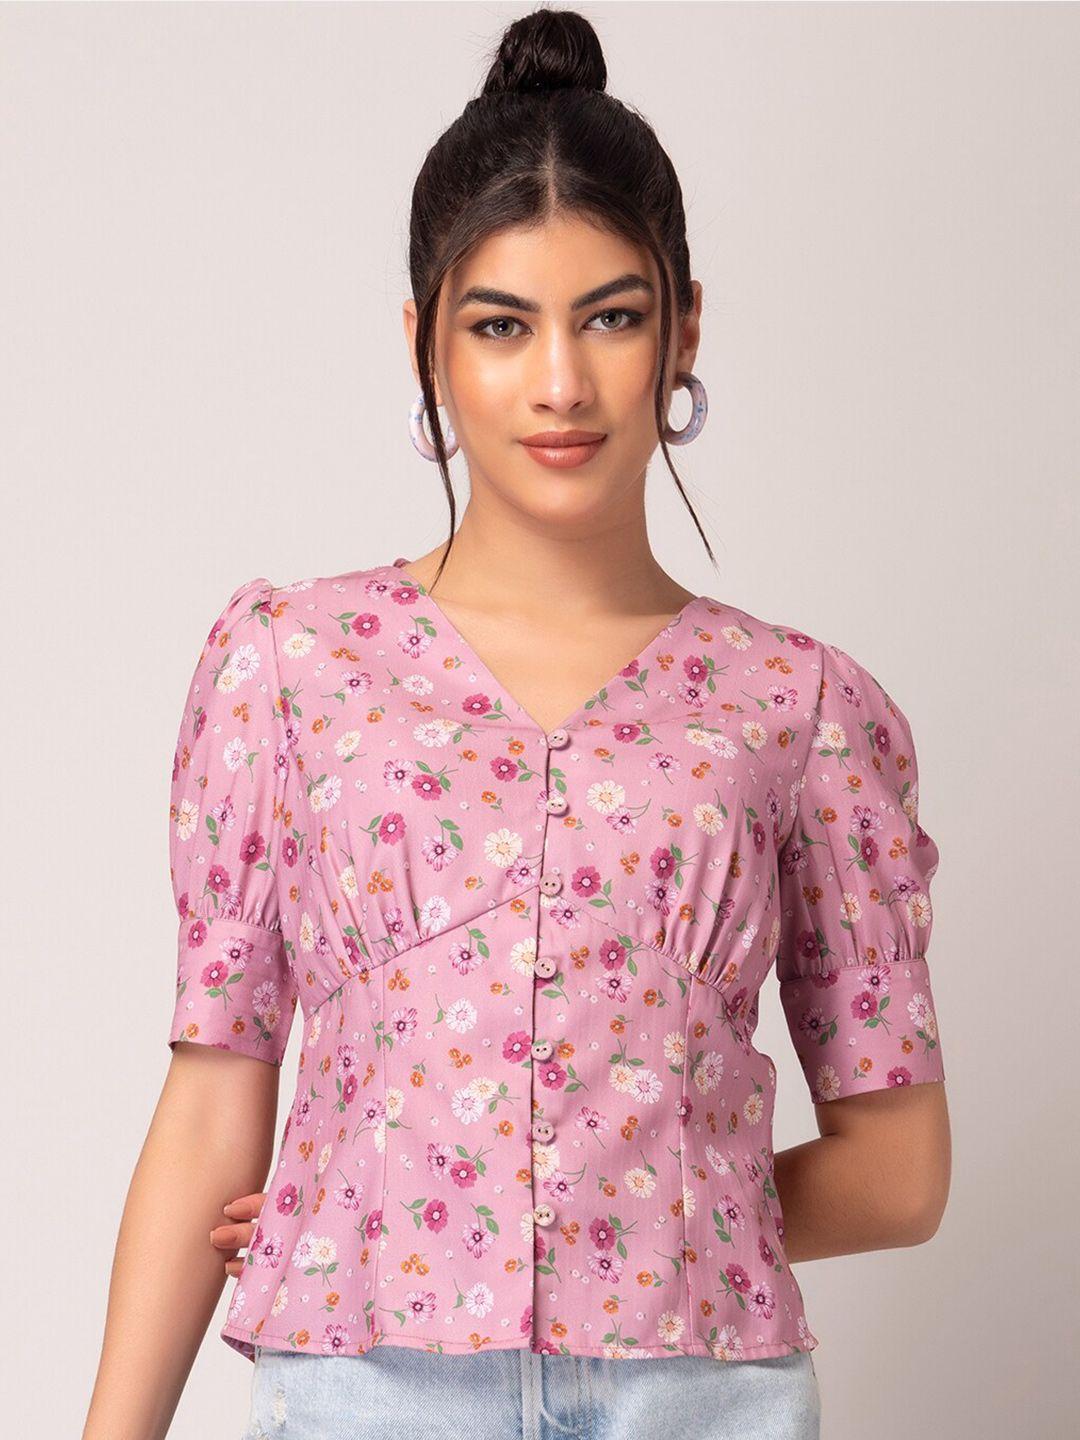 faballey pink floral printed puff sleeve shirt style top